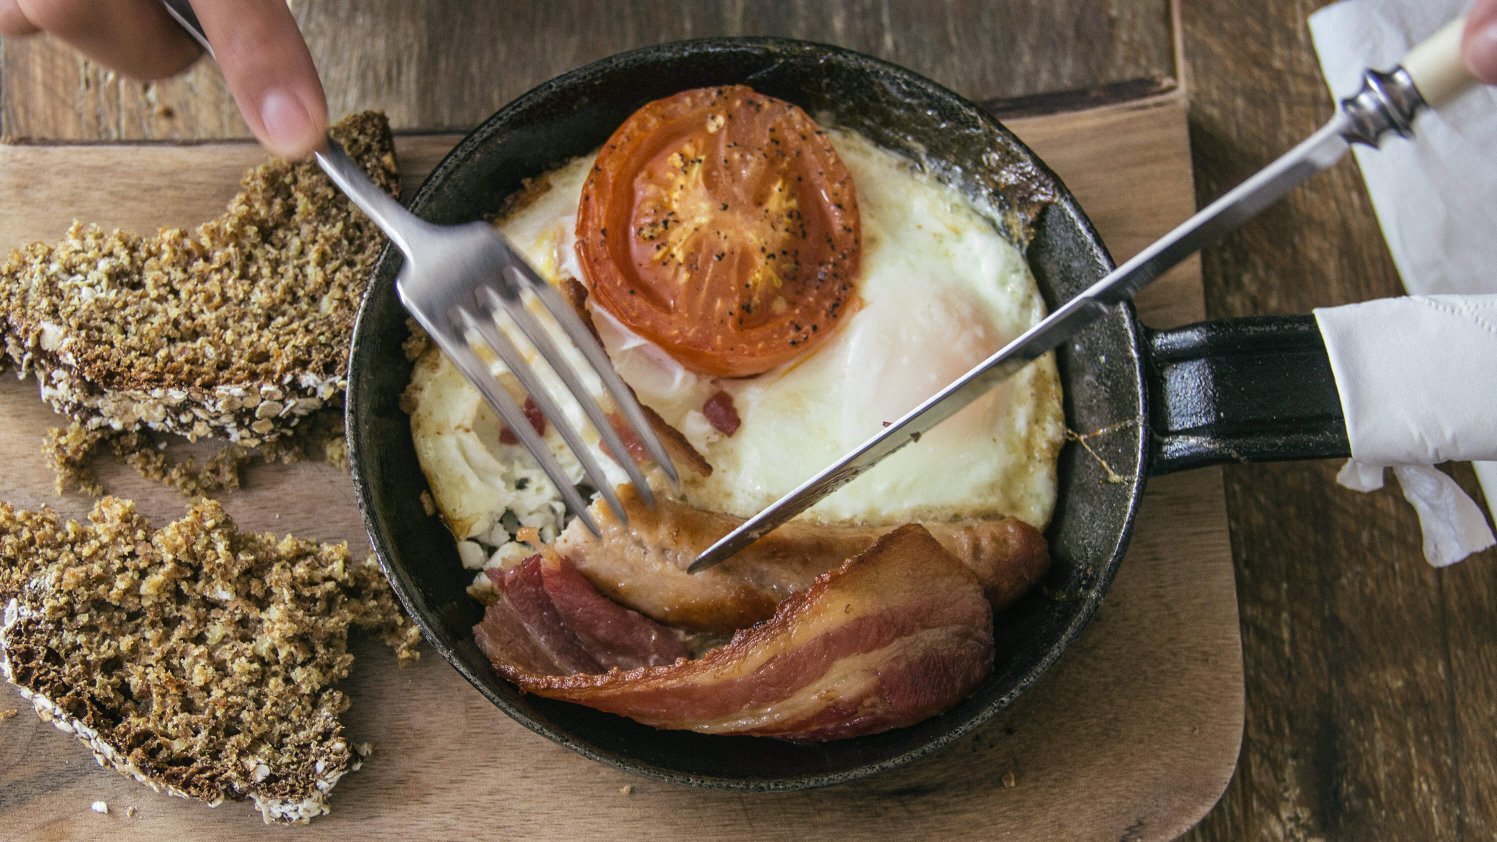 Hands holding knife and fork about to tuck into a cooked Irish breakfast, served in a frying pan